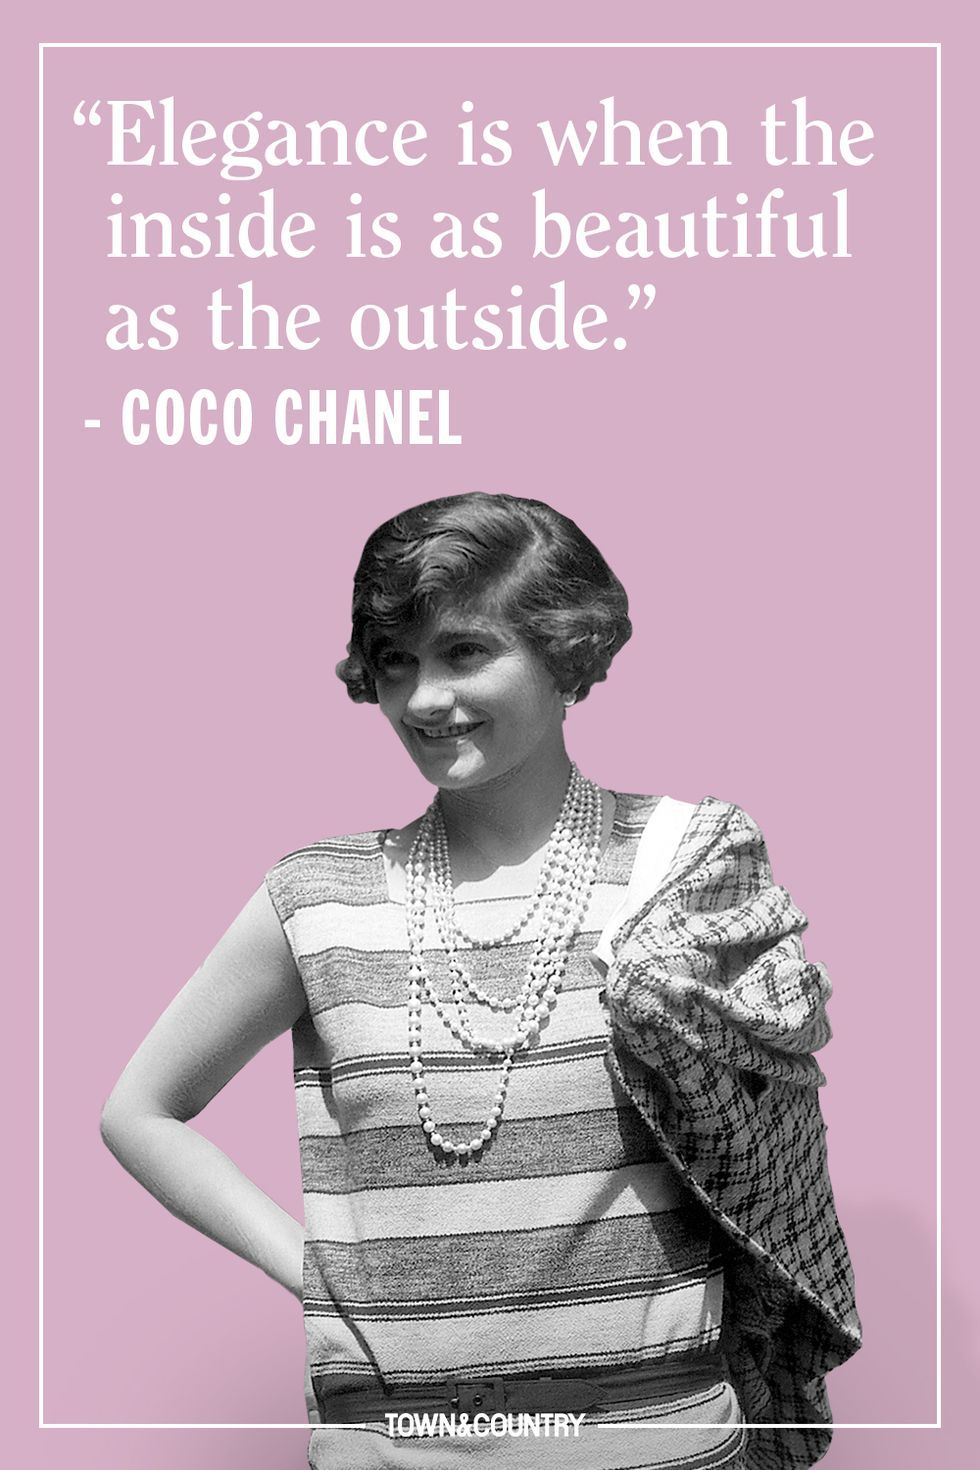 60 Coco Chanel quotes on fashion beauty and self love  Chanel quotes  Fashion quotes inspirational Inspirational quotes